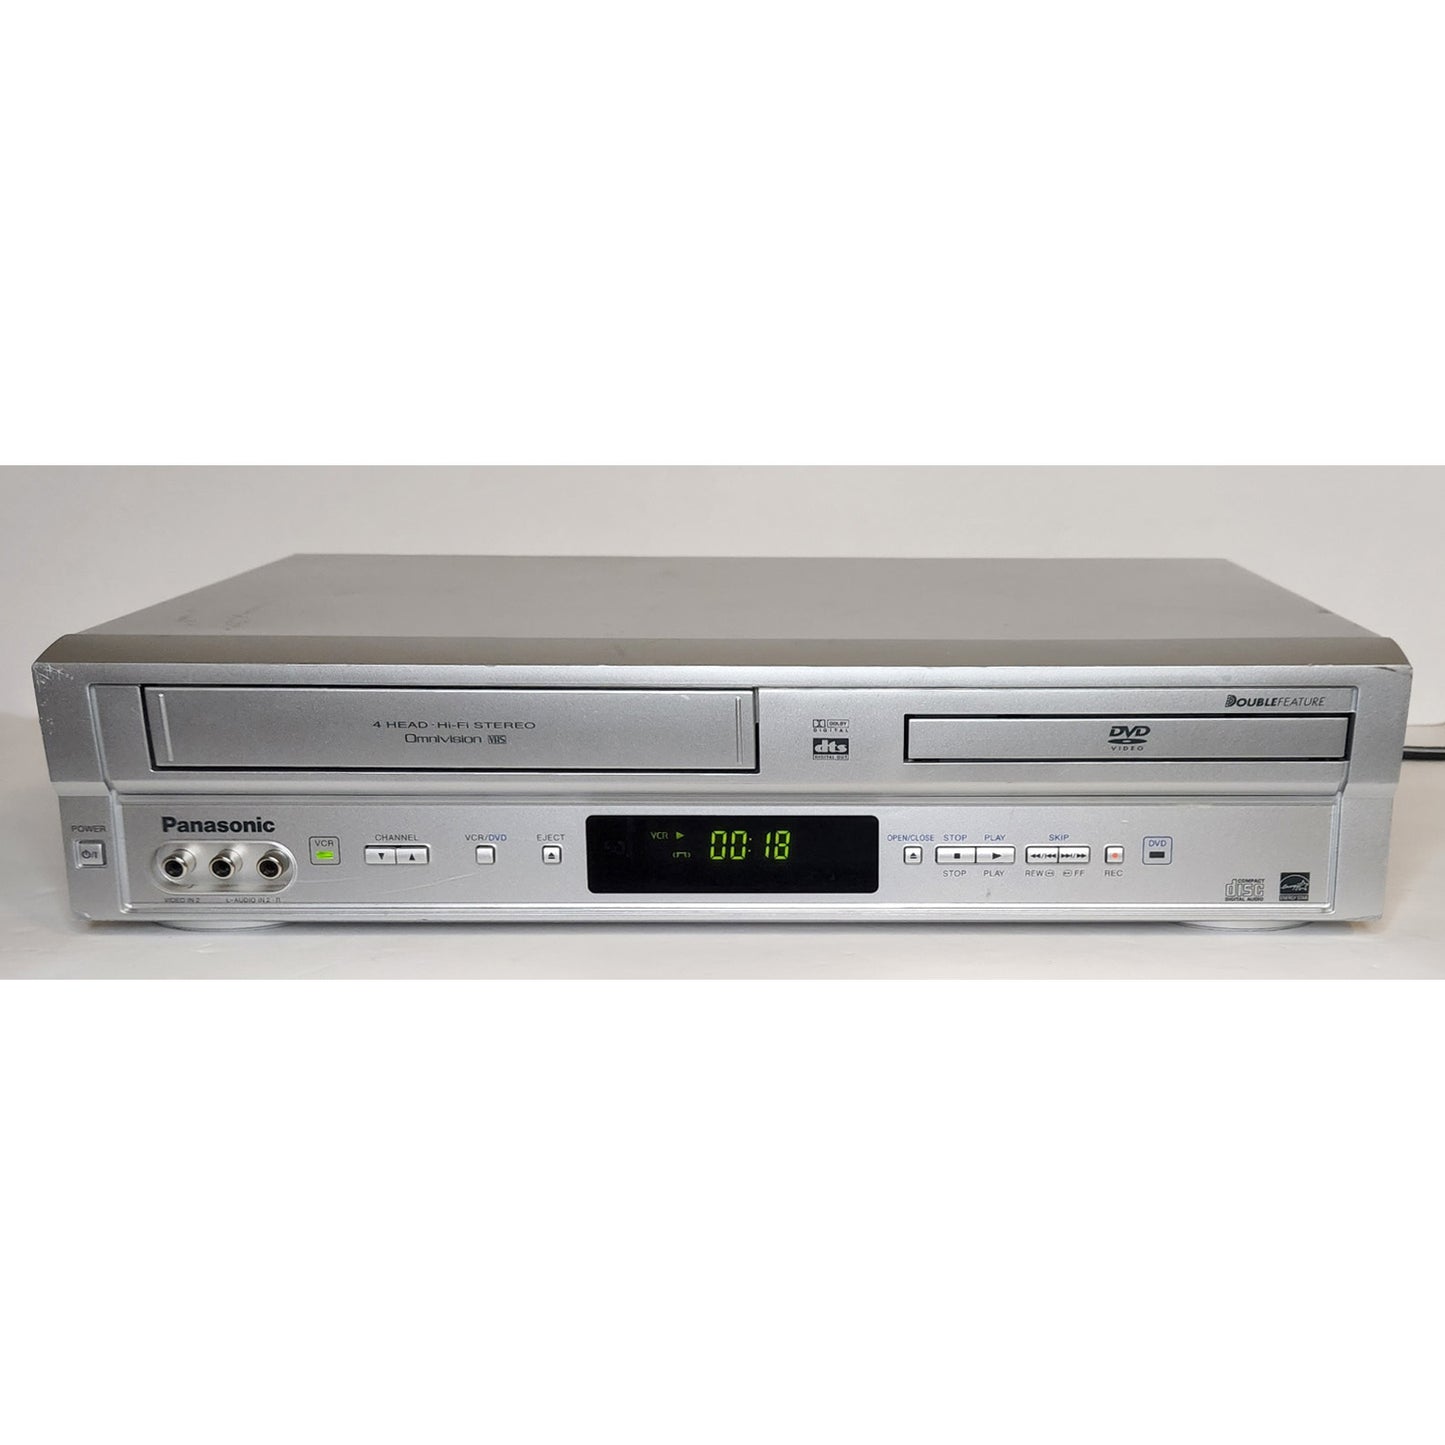 Panasonic PV-D744S Omnivision VCR/DVD Player Combo - Front Panel